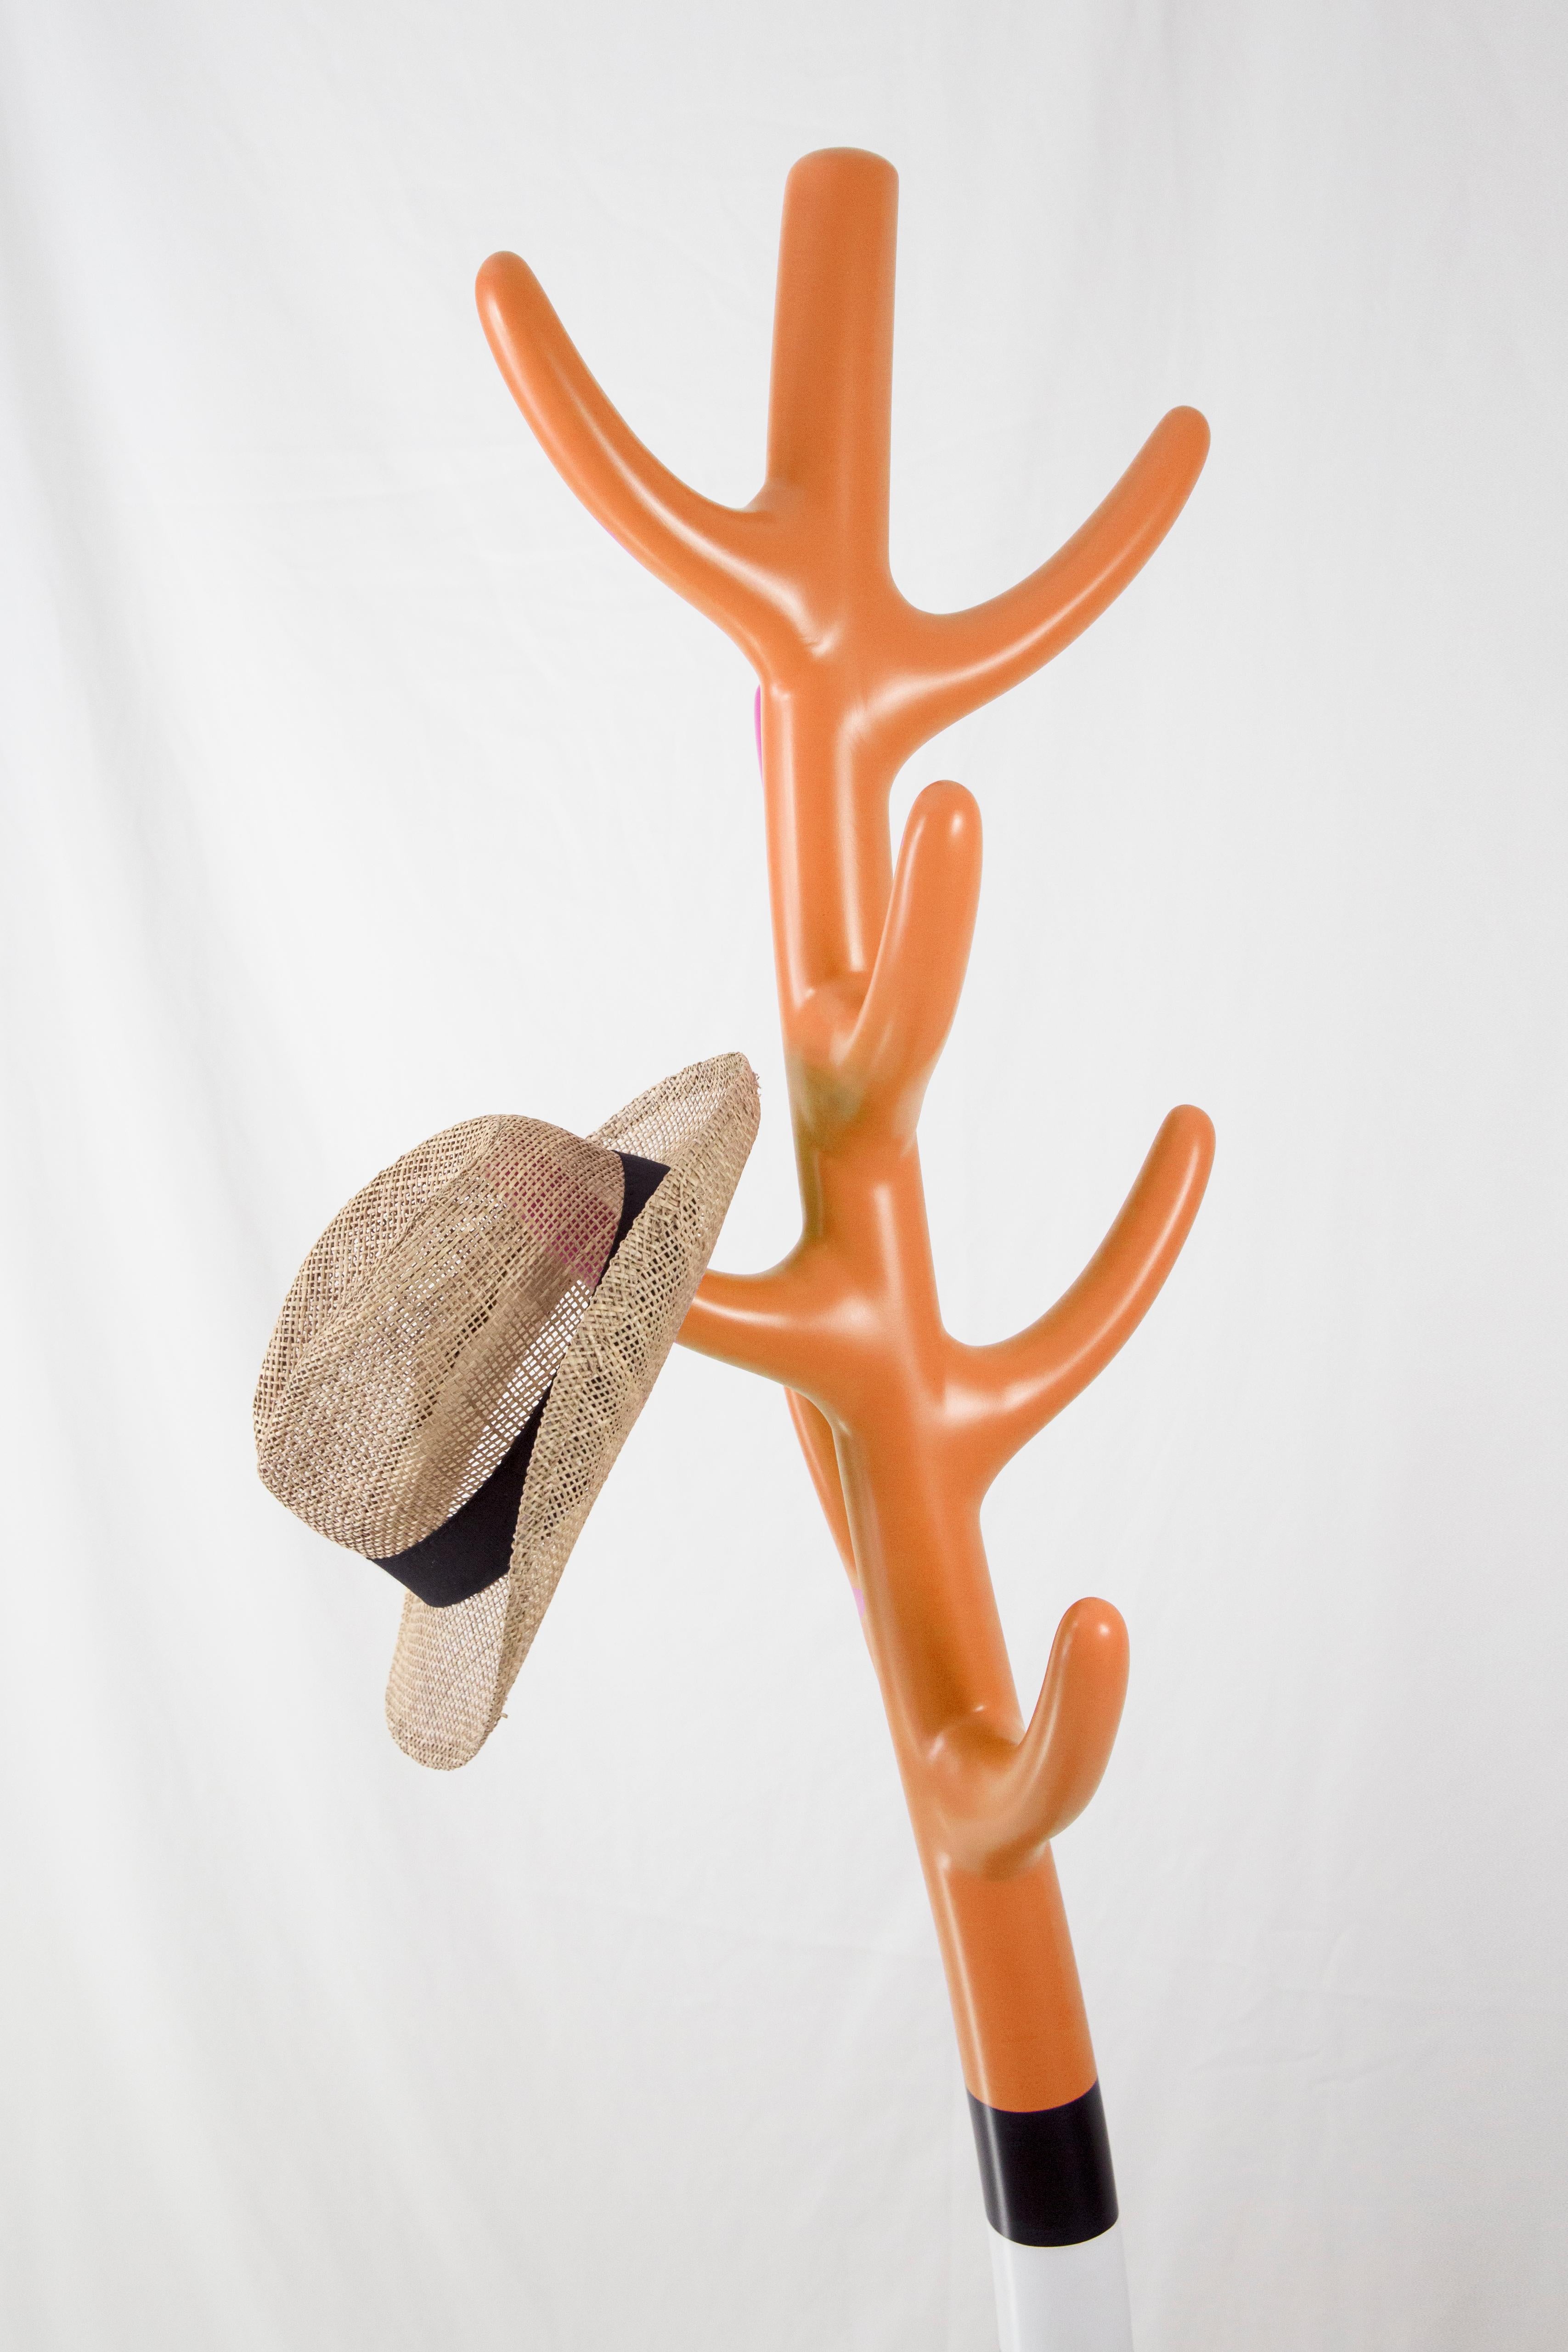 Crooked Coat Rack

Amorphous and sculptural hanger. Besides its function, it is designed with an artistic and lively approach. A standout art object that your guests won't be able to take their eyes off.

Production method and material

Produced by